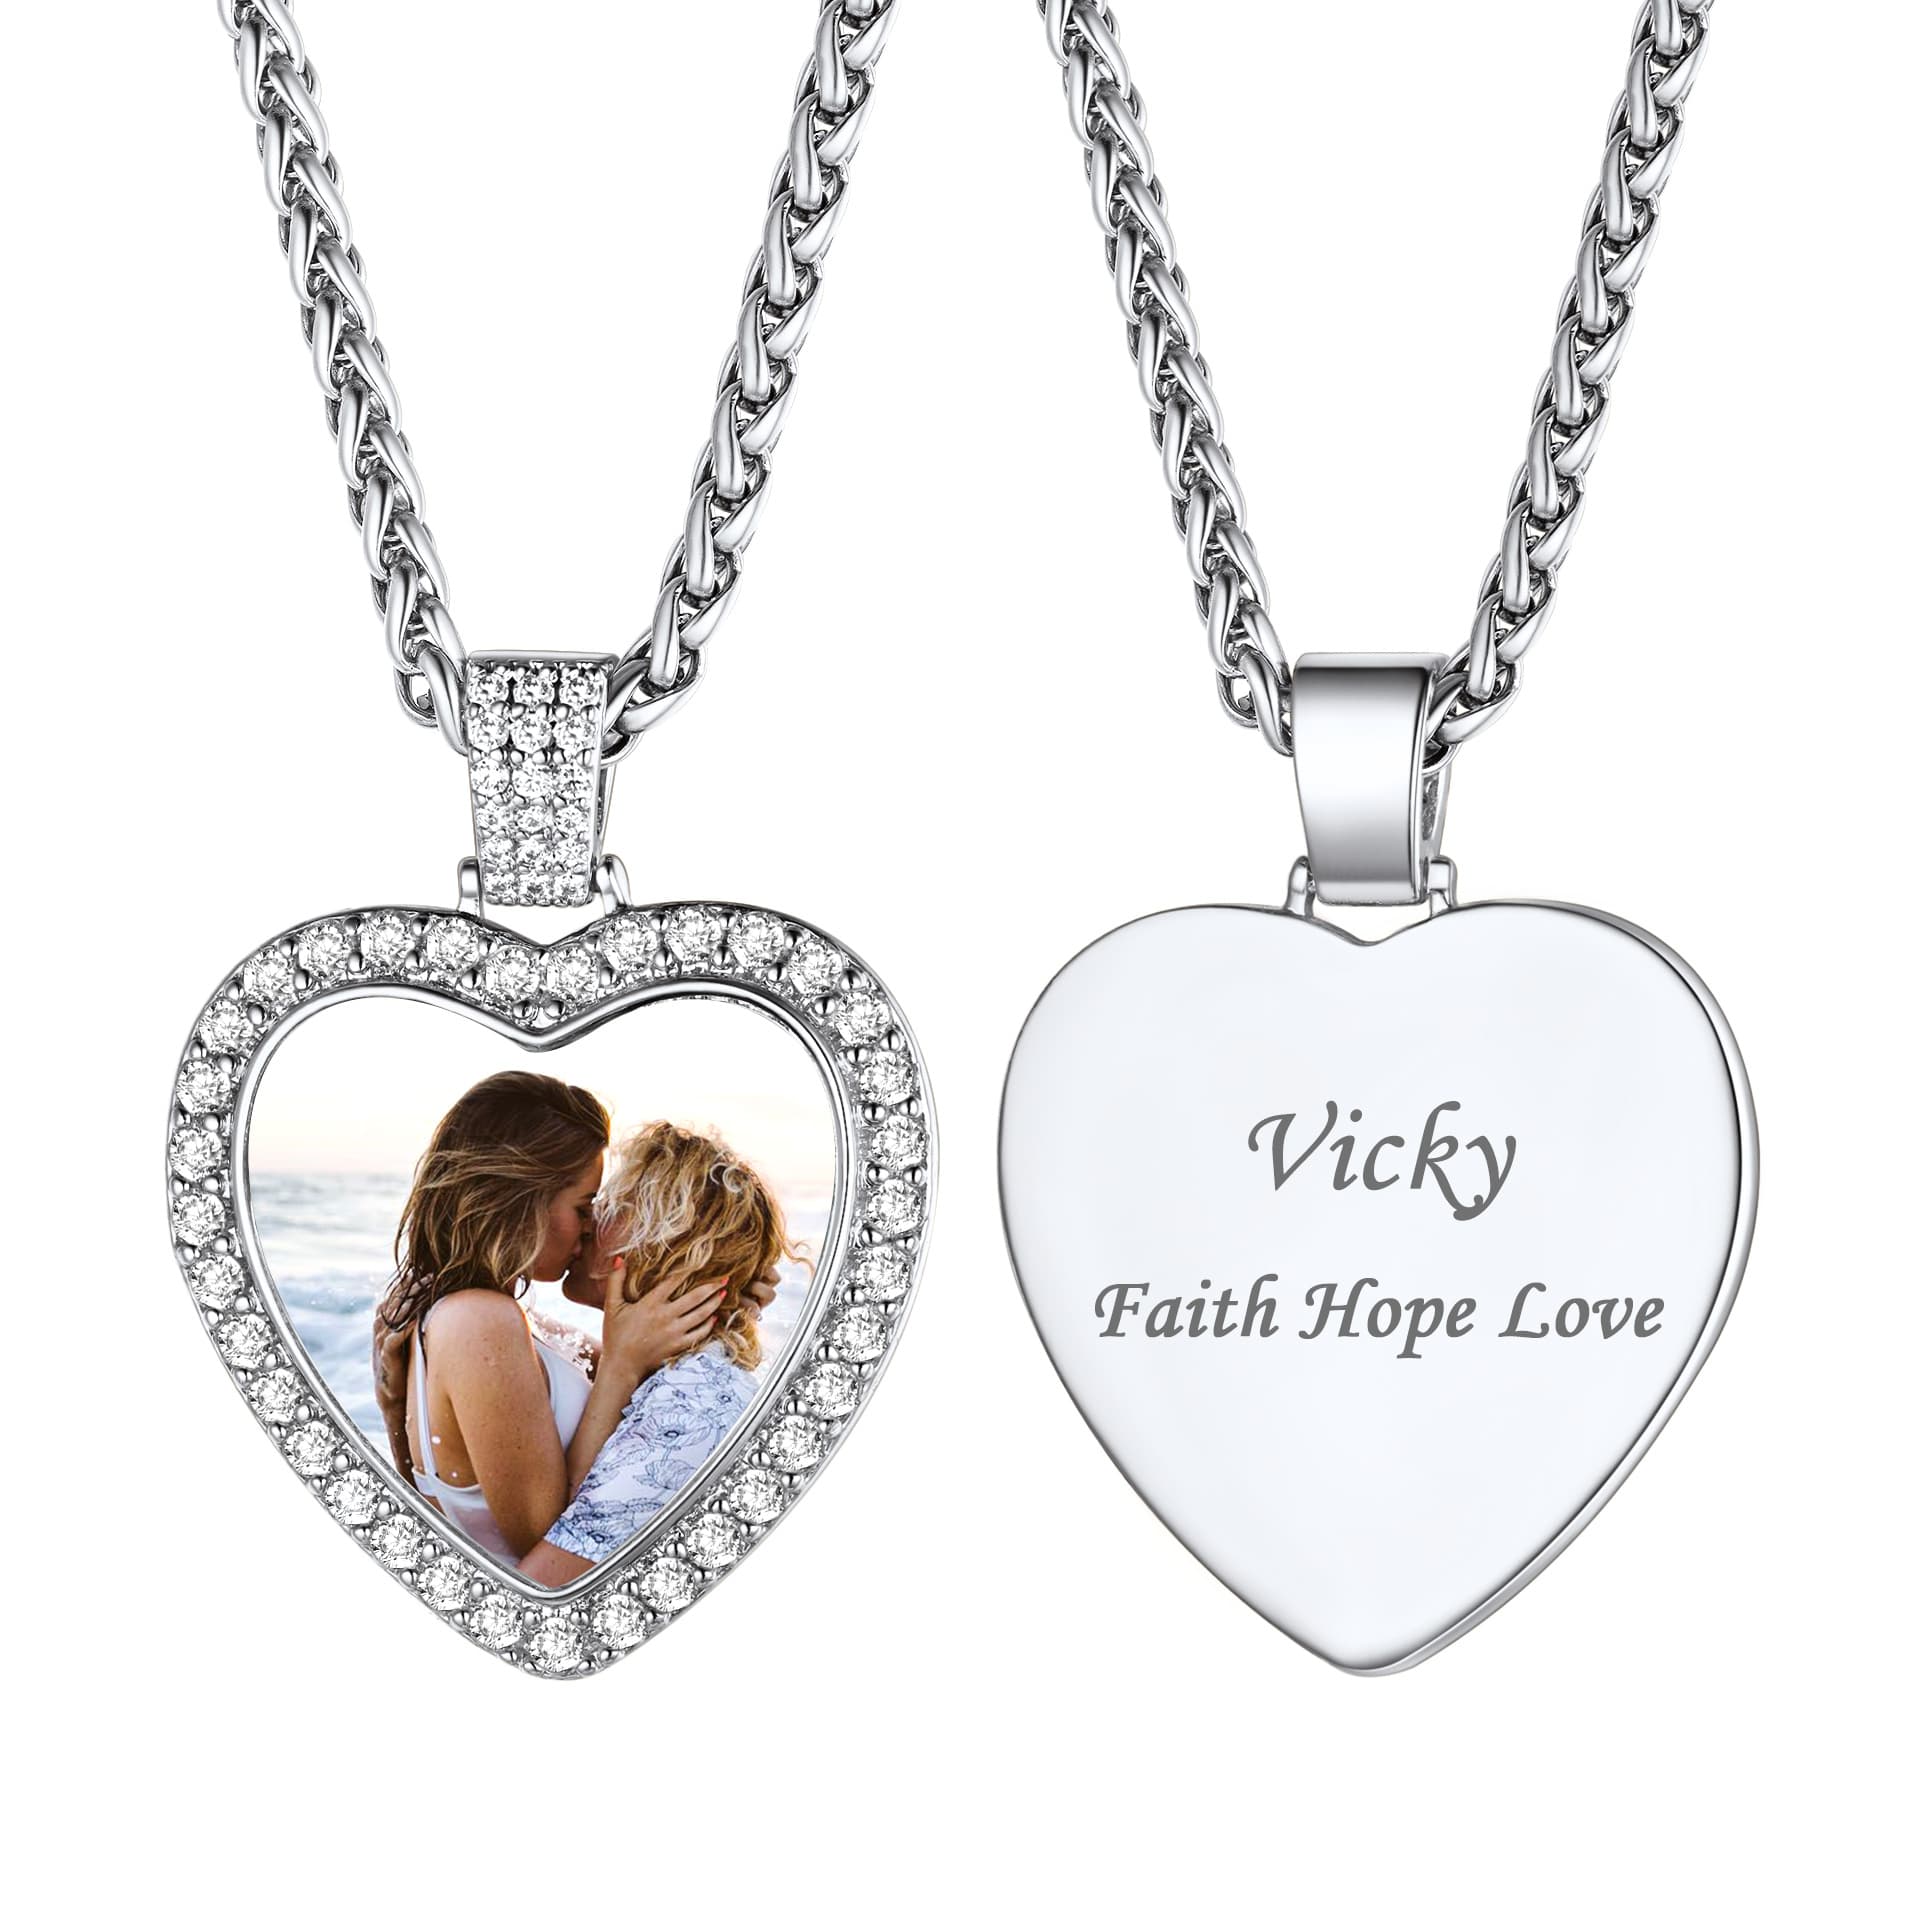 Personalized Heart Photo Pendant Necklace With Cubic Zirconia